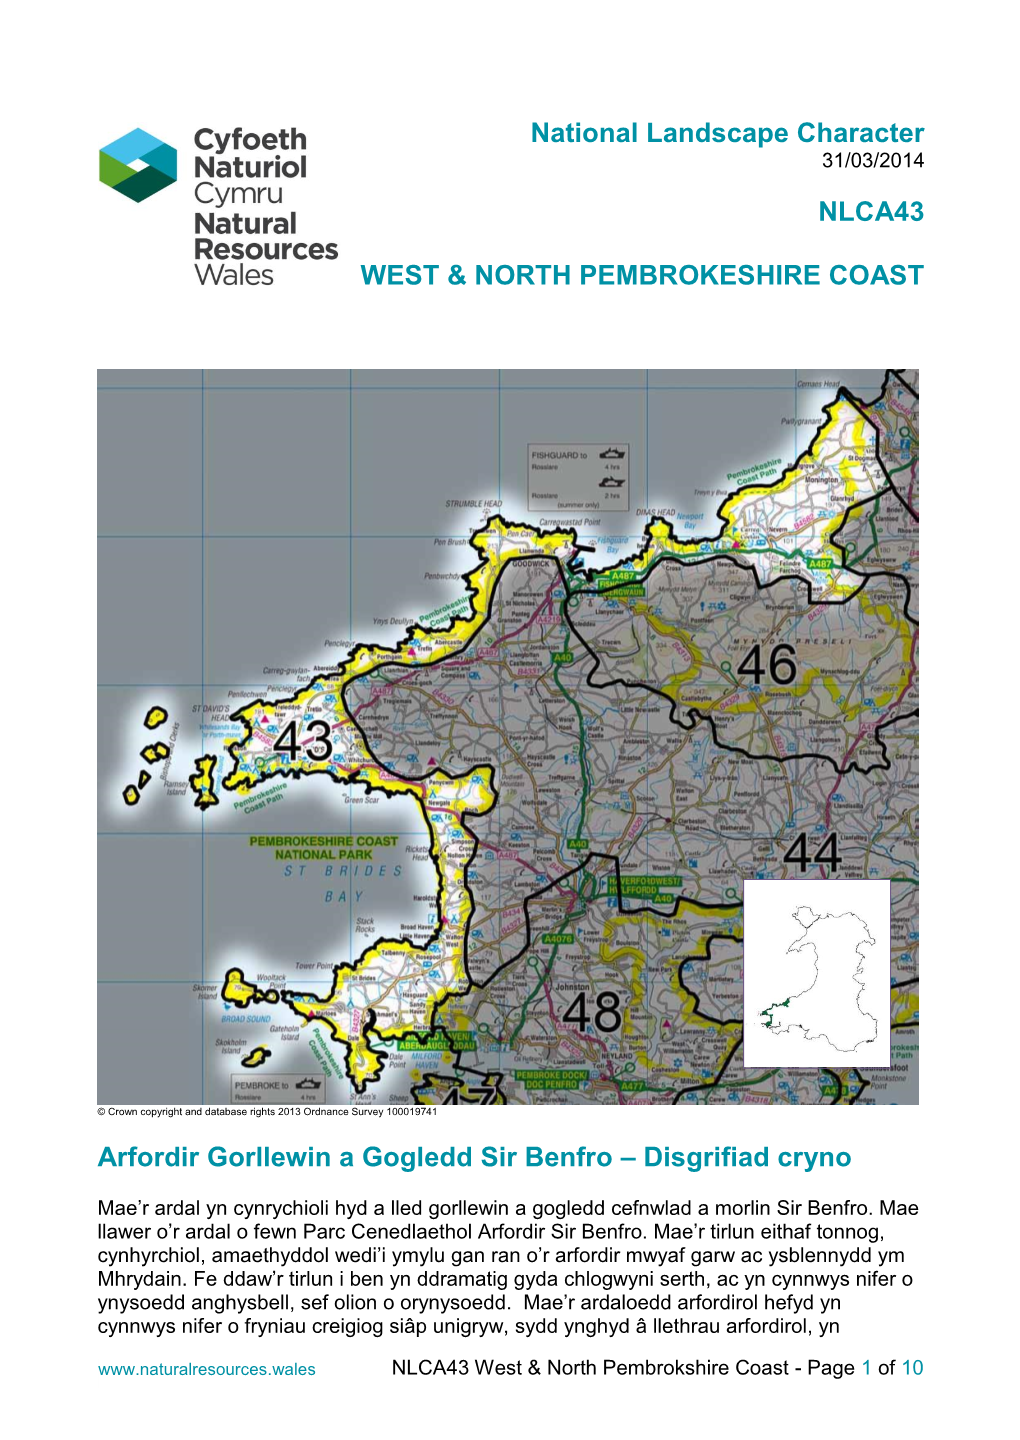 NLCA43 West and North Pembrokeshire Coast